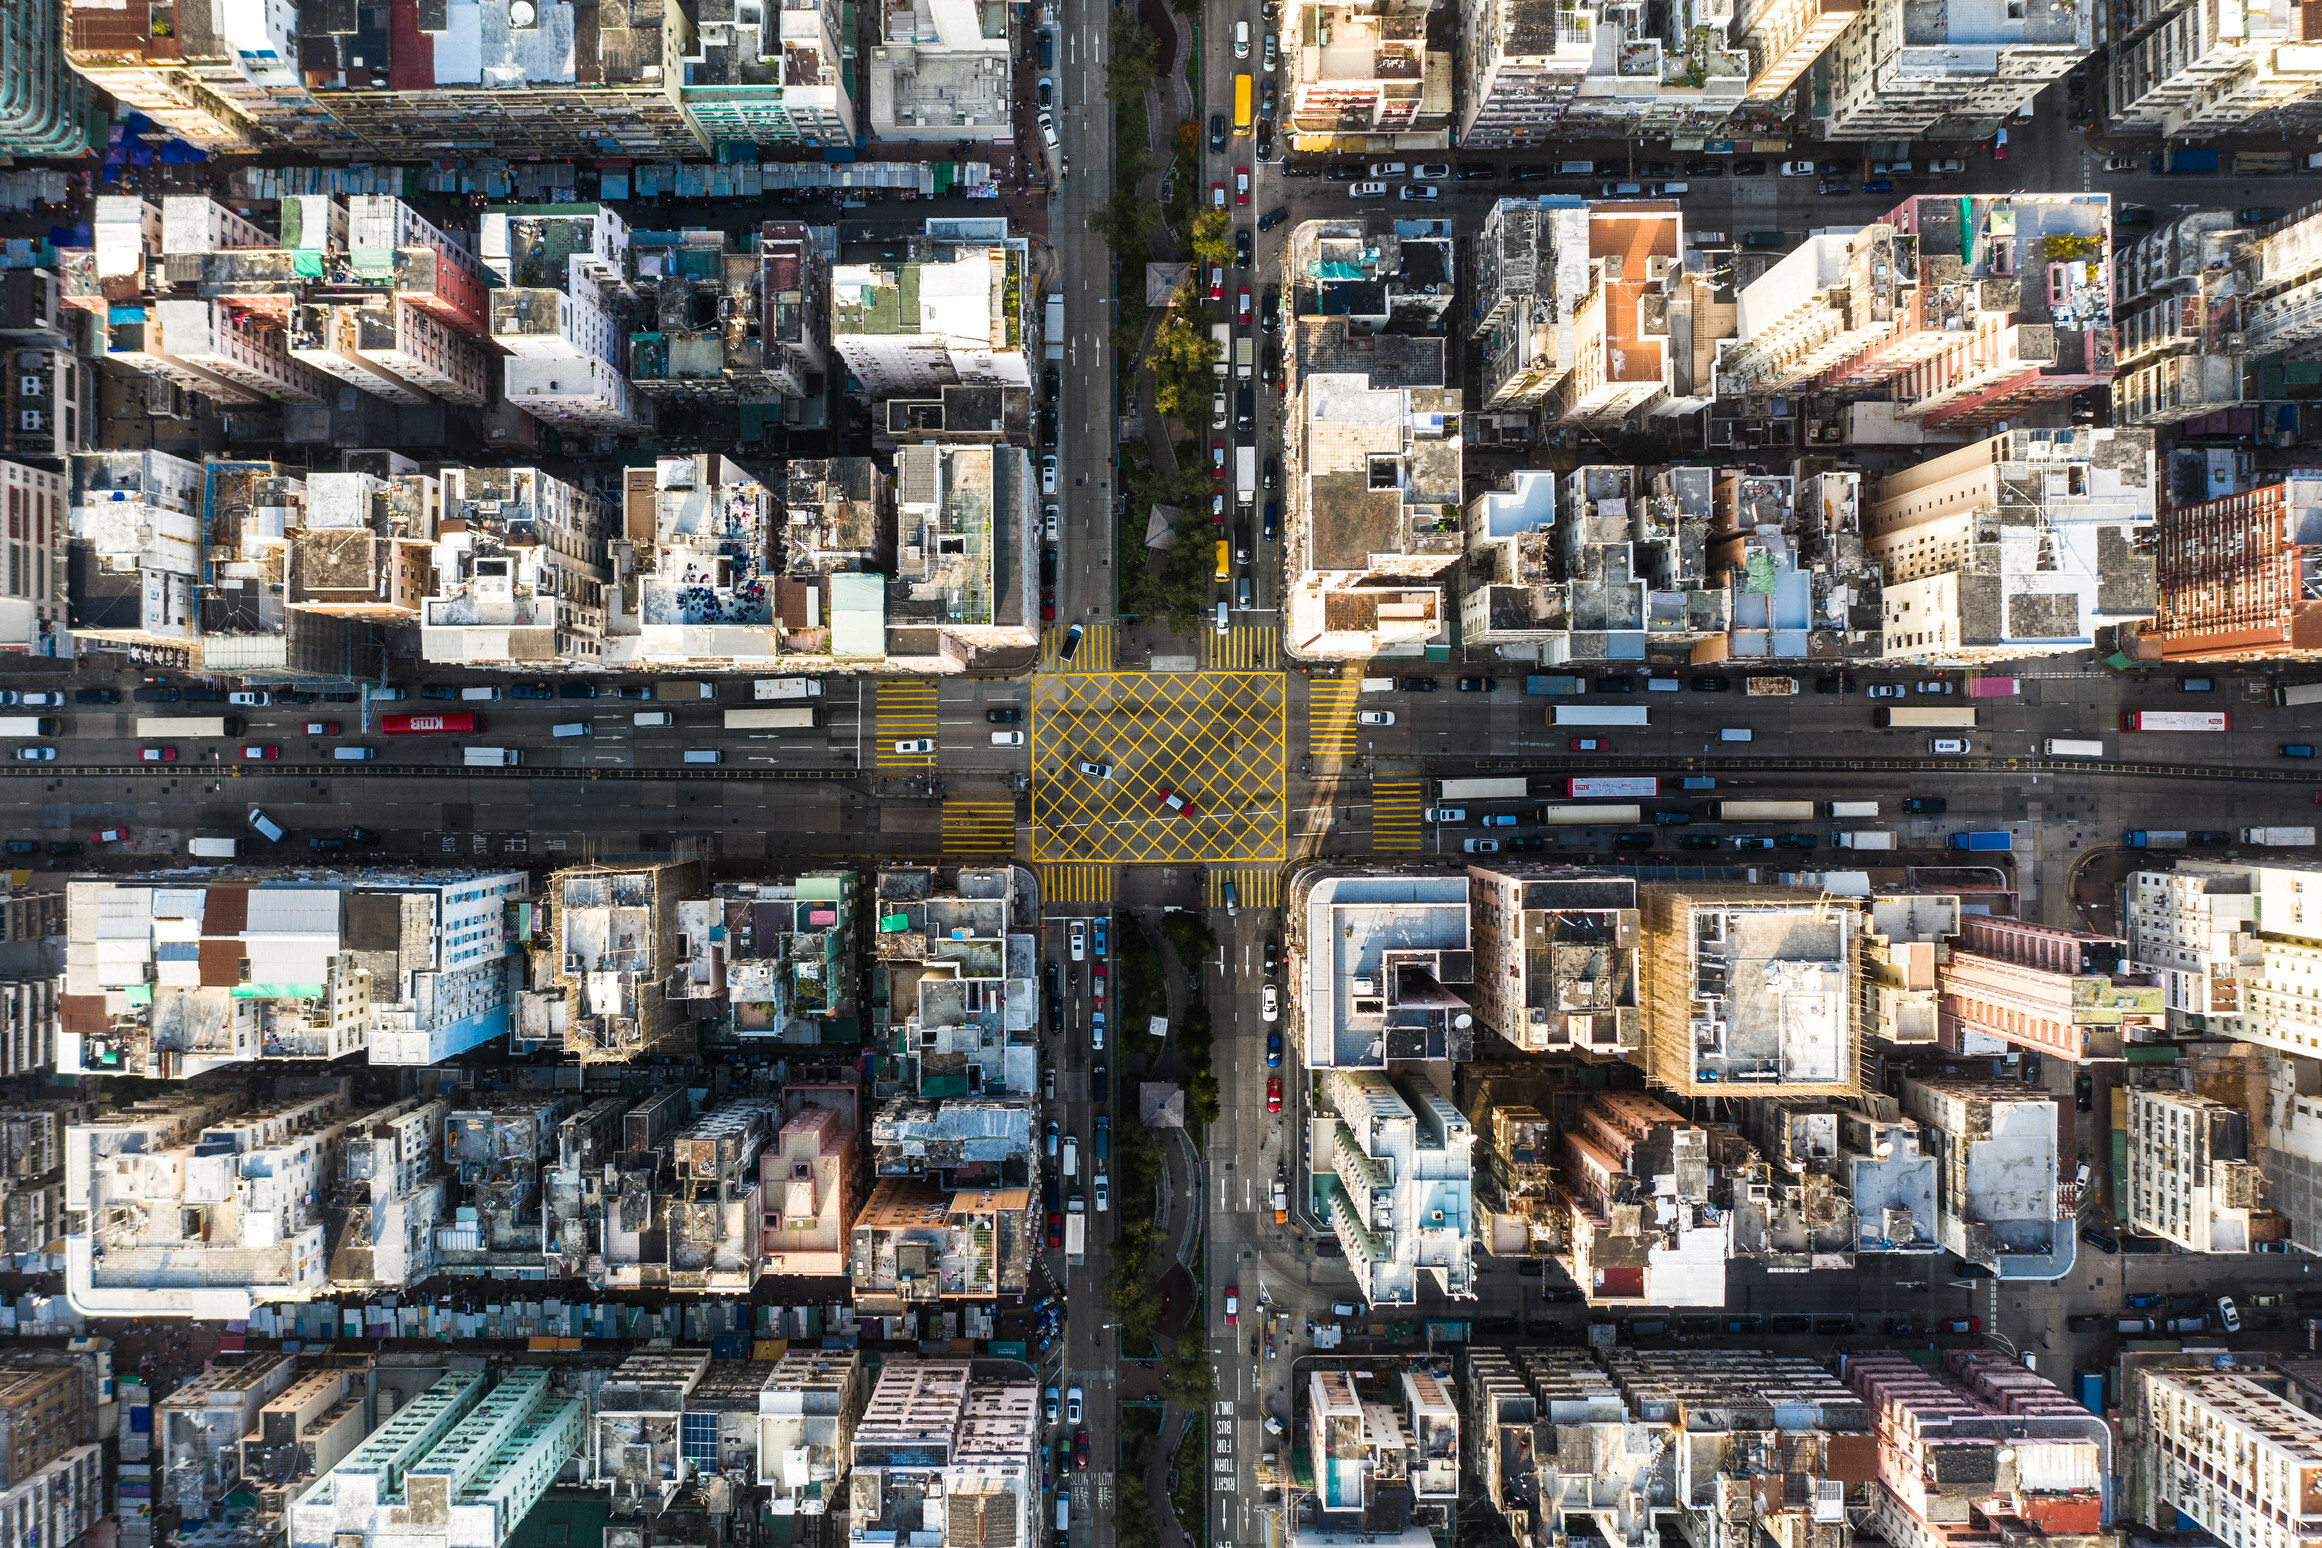 An aerial view of Hong Kong’s residential buildings in Sham Shui Po. Photo: Getty Images